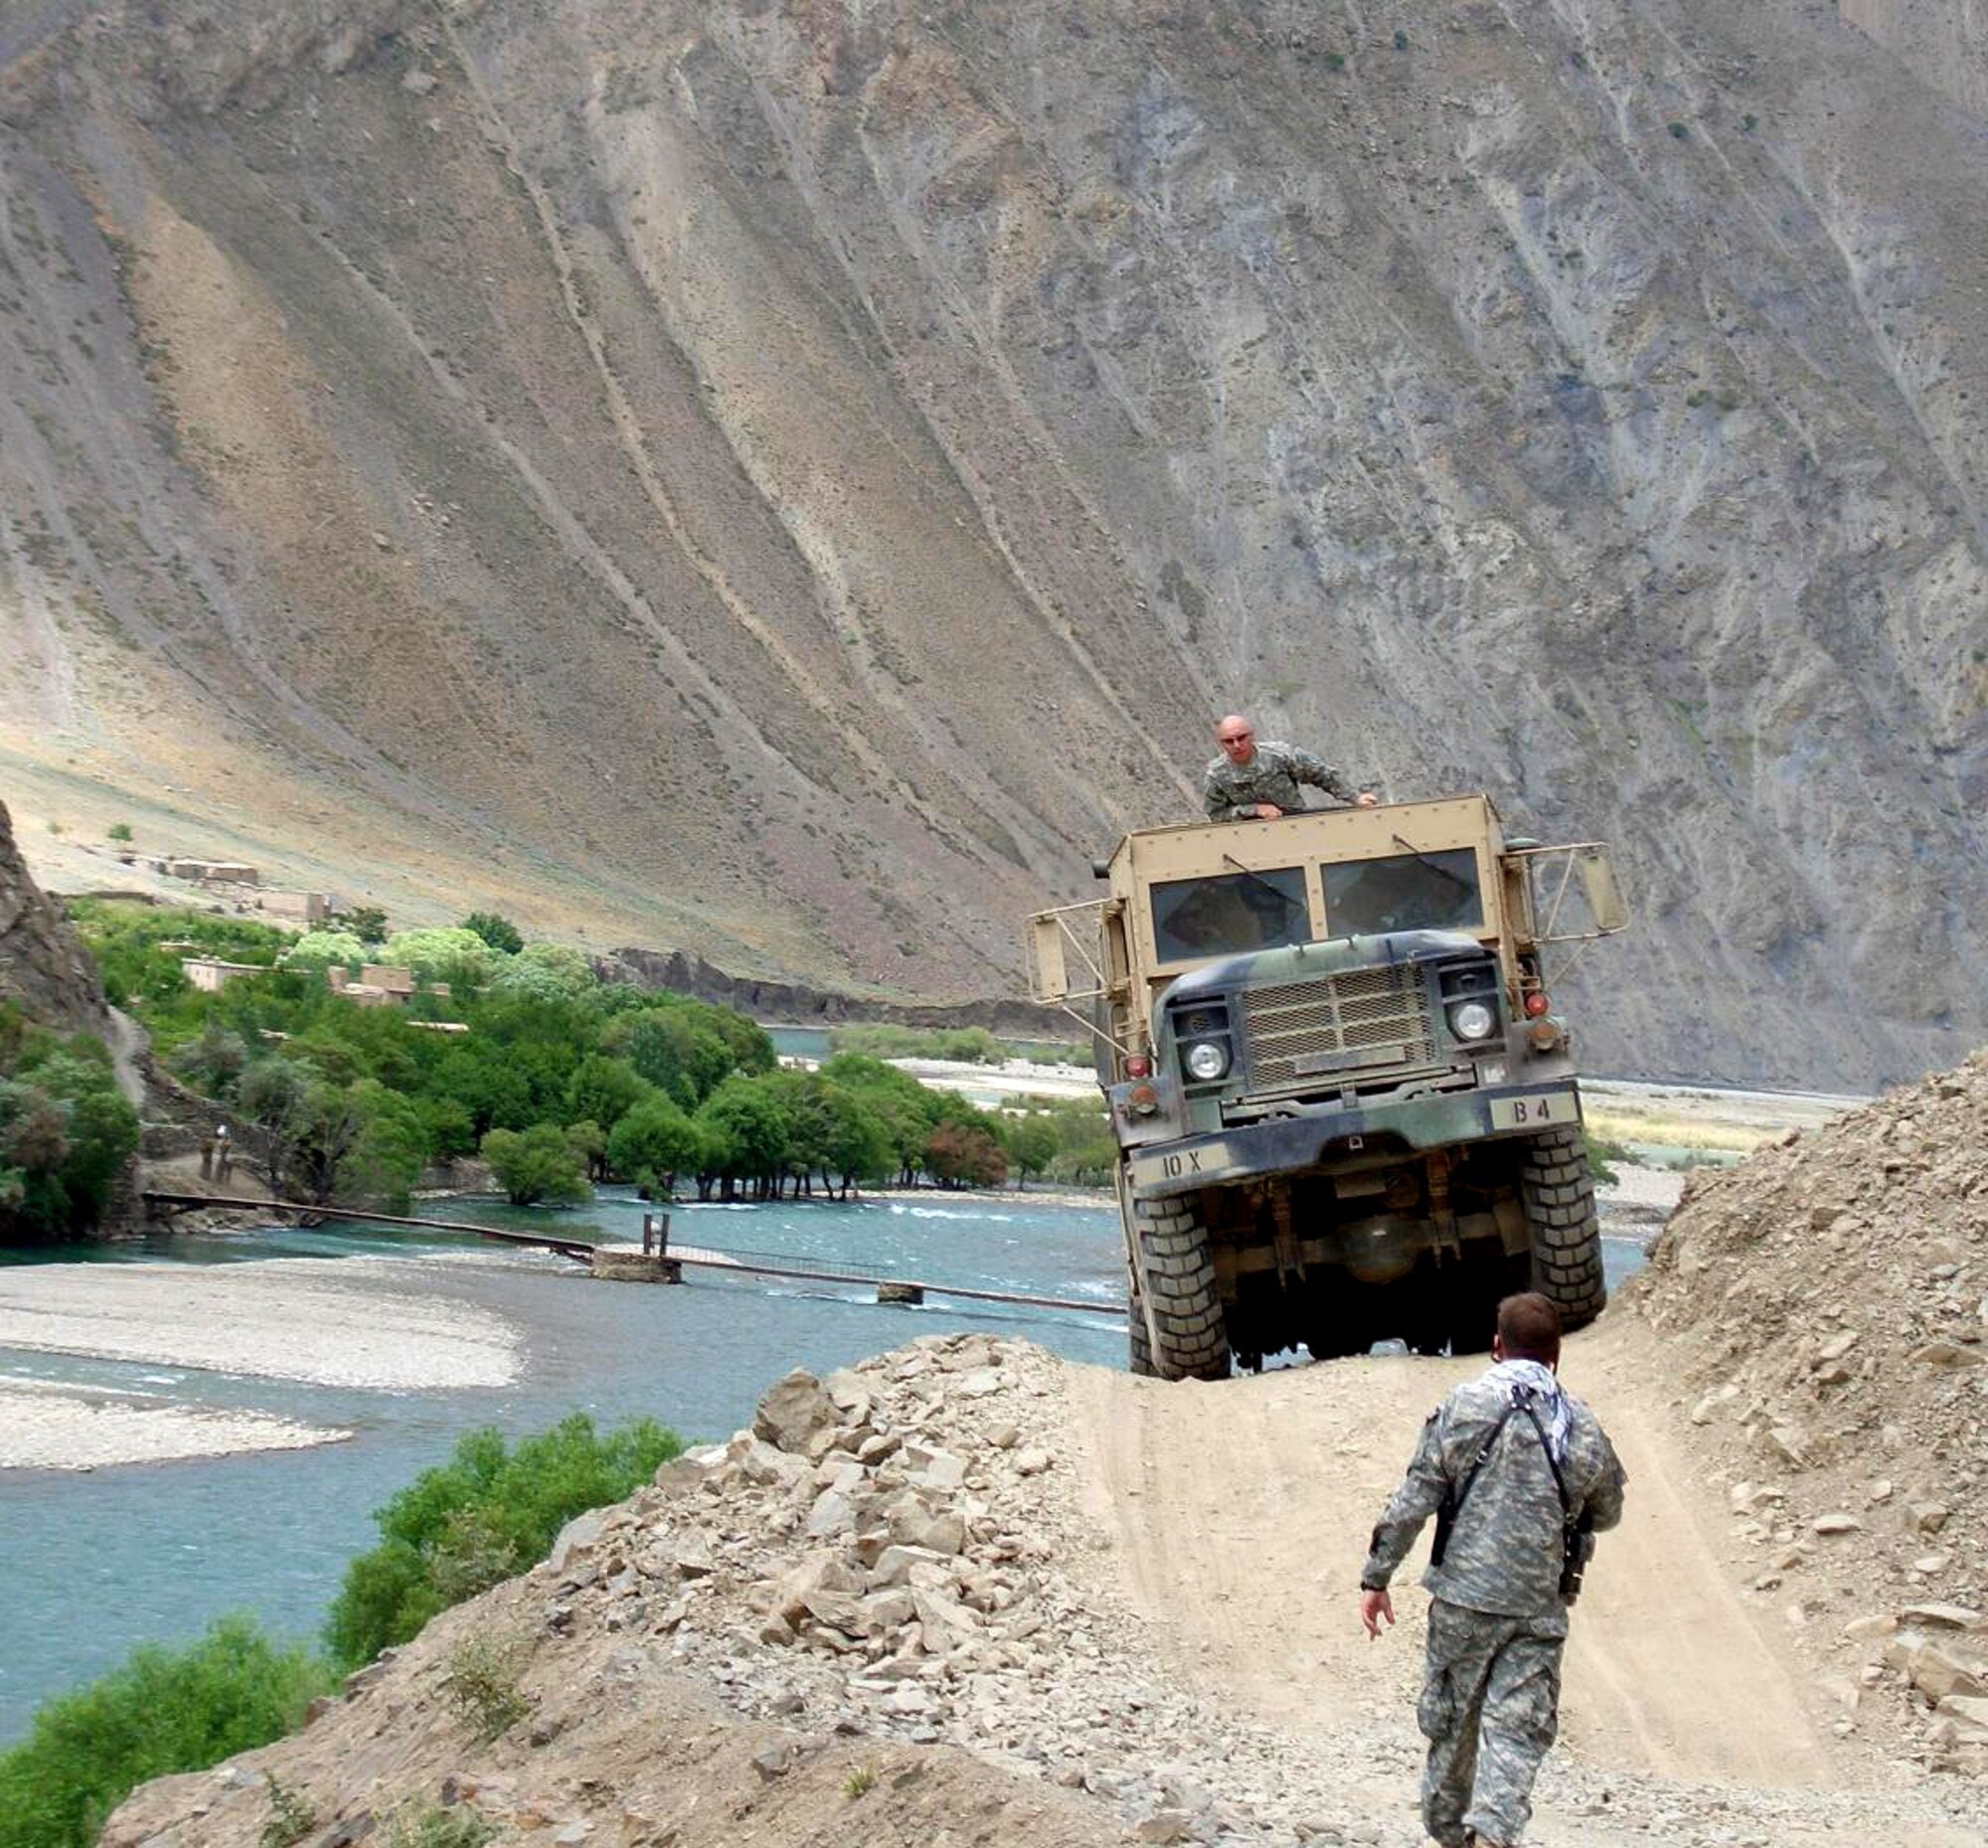 A five-ton, six-wheel drive truck loaded with humanitarian assistance supplies makes its way over a narrow road in the Panjshir Province, Afghanistan, on Monday, June 12. With a ground guide and spotter in the truck's turret, the multi-service supply convoy delivered supplies to the village of Dara. (Courtesy photo/Marine Col. Steve Hasty)